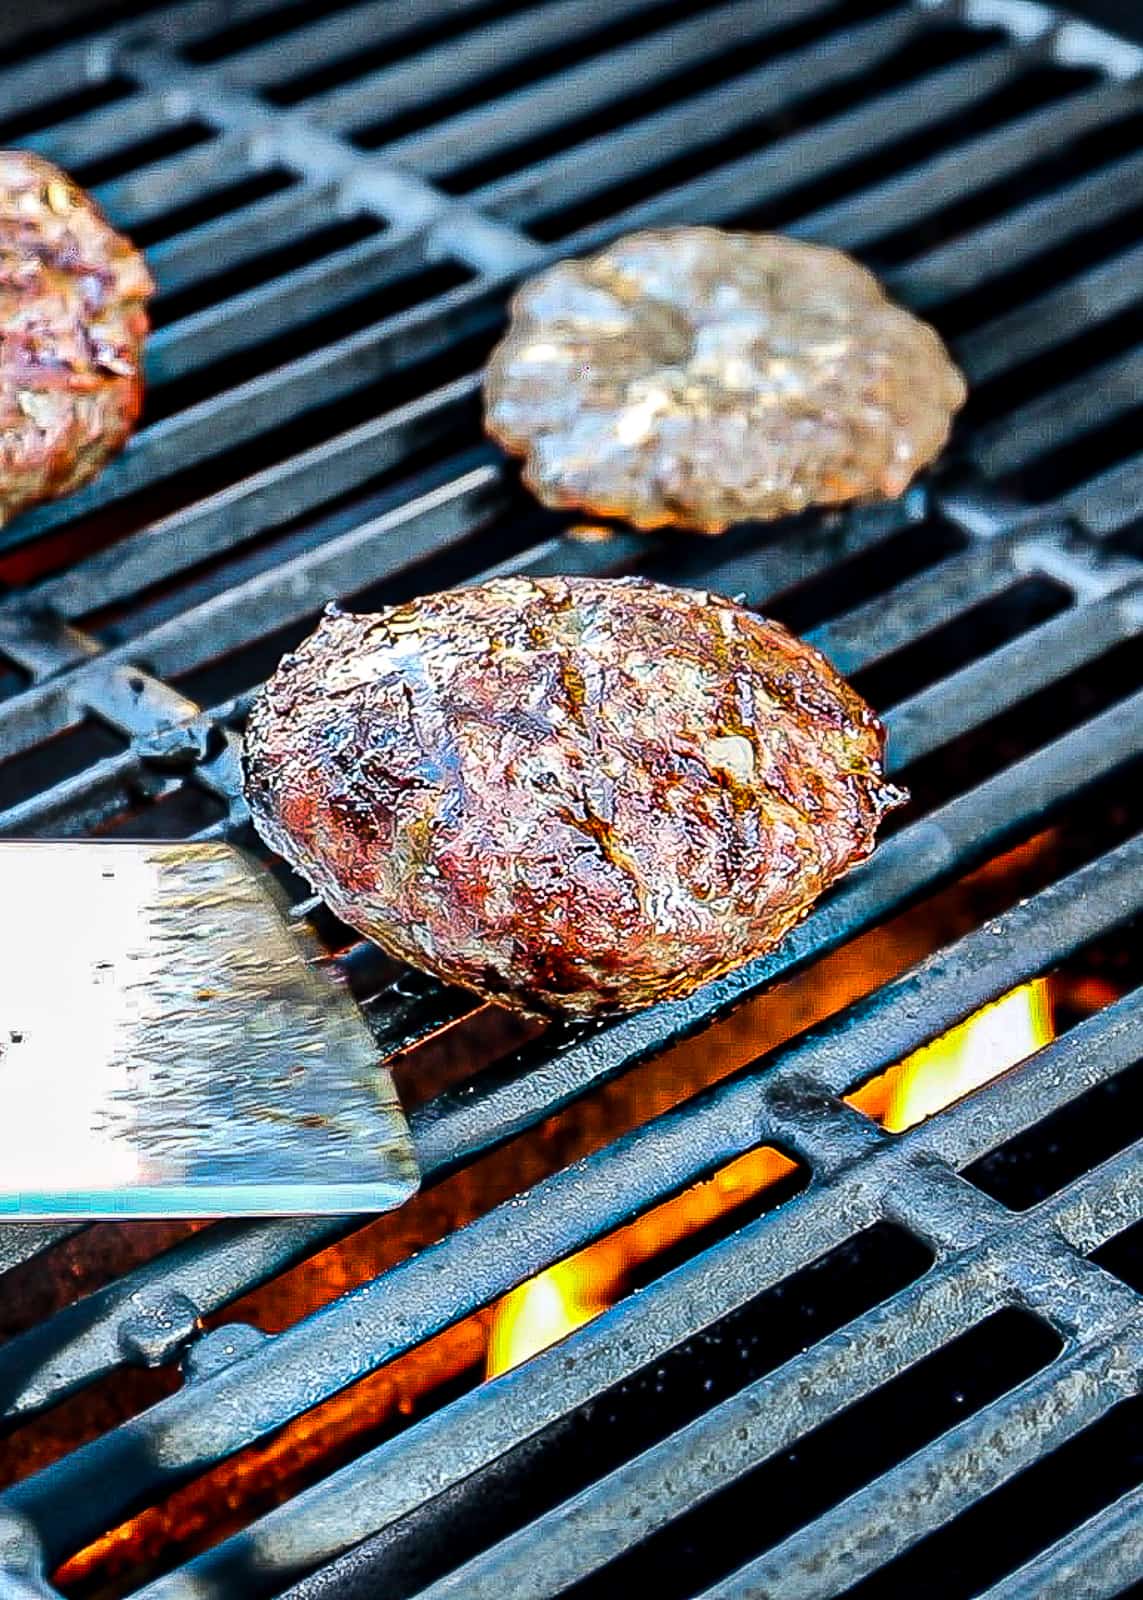 Demonstrating how to grill burgers on gas grill before flipping